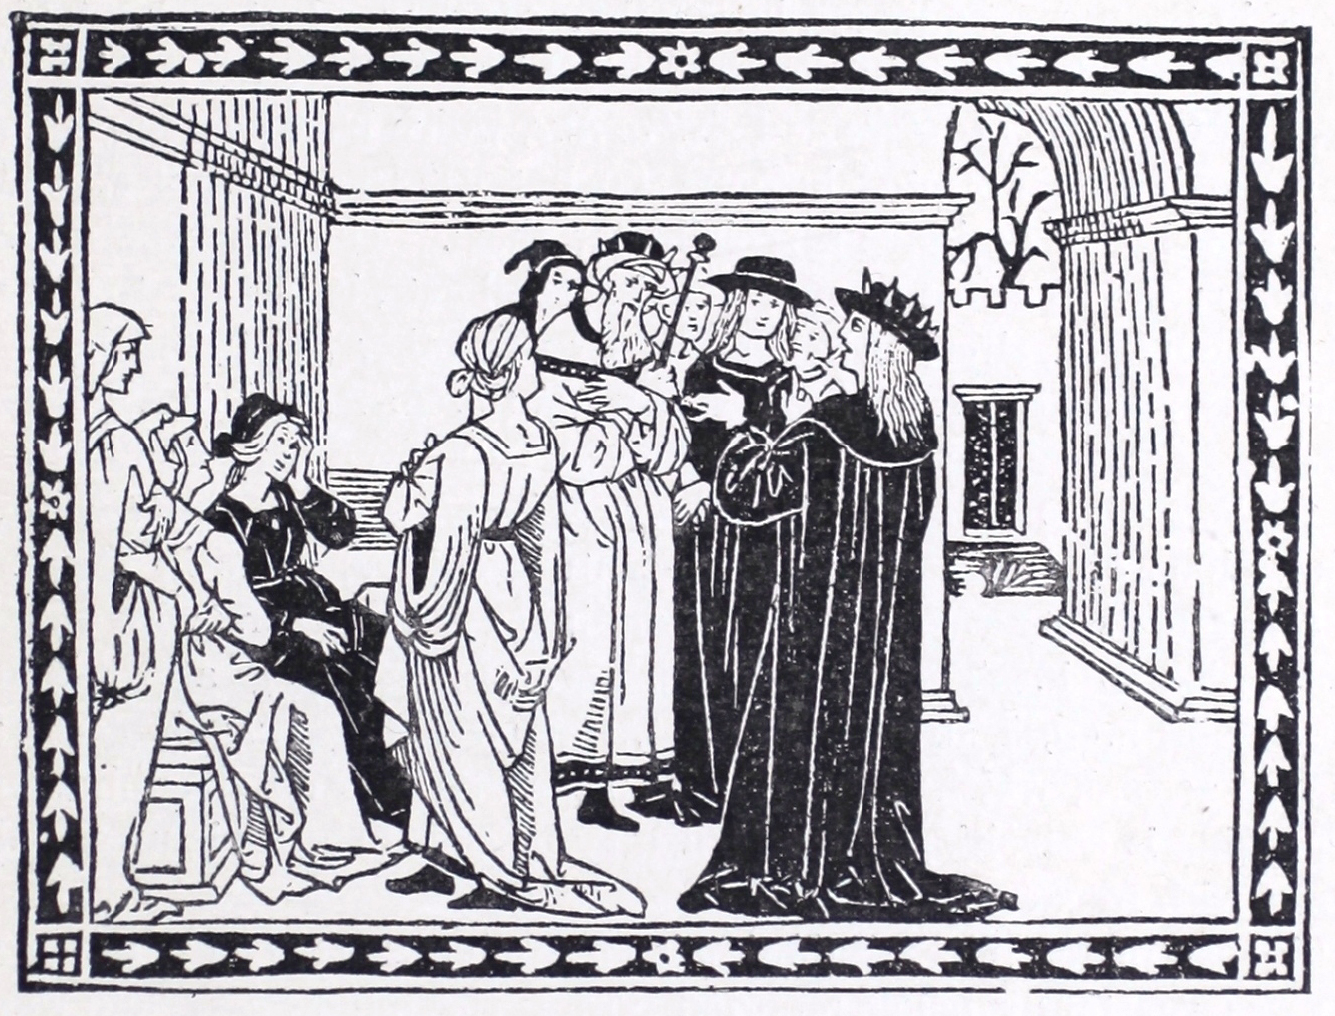 Wood enraved image shows a scene with royal figures gathering gathering within castle walls. The figures, both men and woman, are focused around a man with a dark robe and crown who is facing the crowd. His back is facing forward and his head is turned to the left.